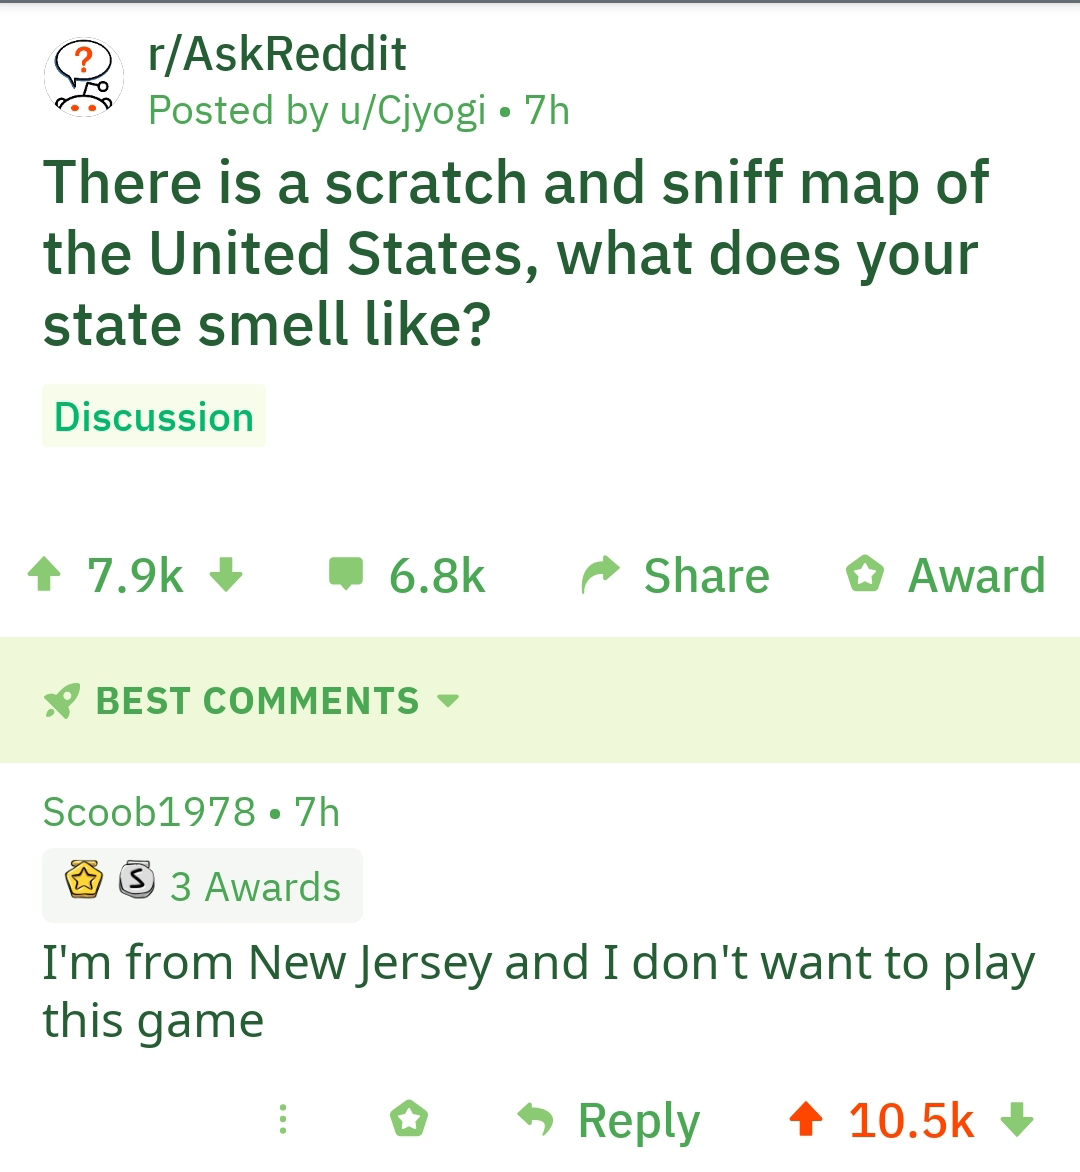 grass - rAskReddit Posted by uCjyogi 7h There is a scratch and sniff map of the United States, what does your state smell ? Discussion Award Best Scoob1978 7h S S 3 Awards I'm from New Jersey and I don't want to play this game i > 4